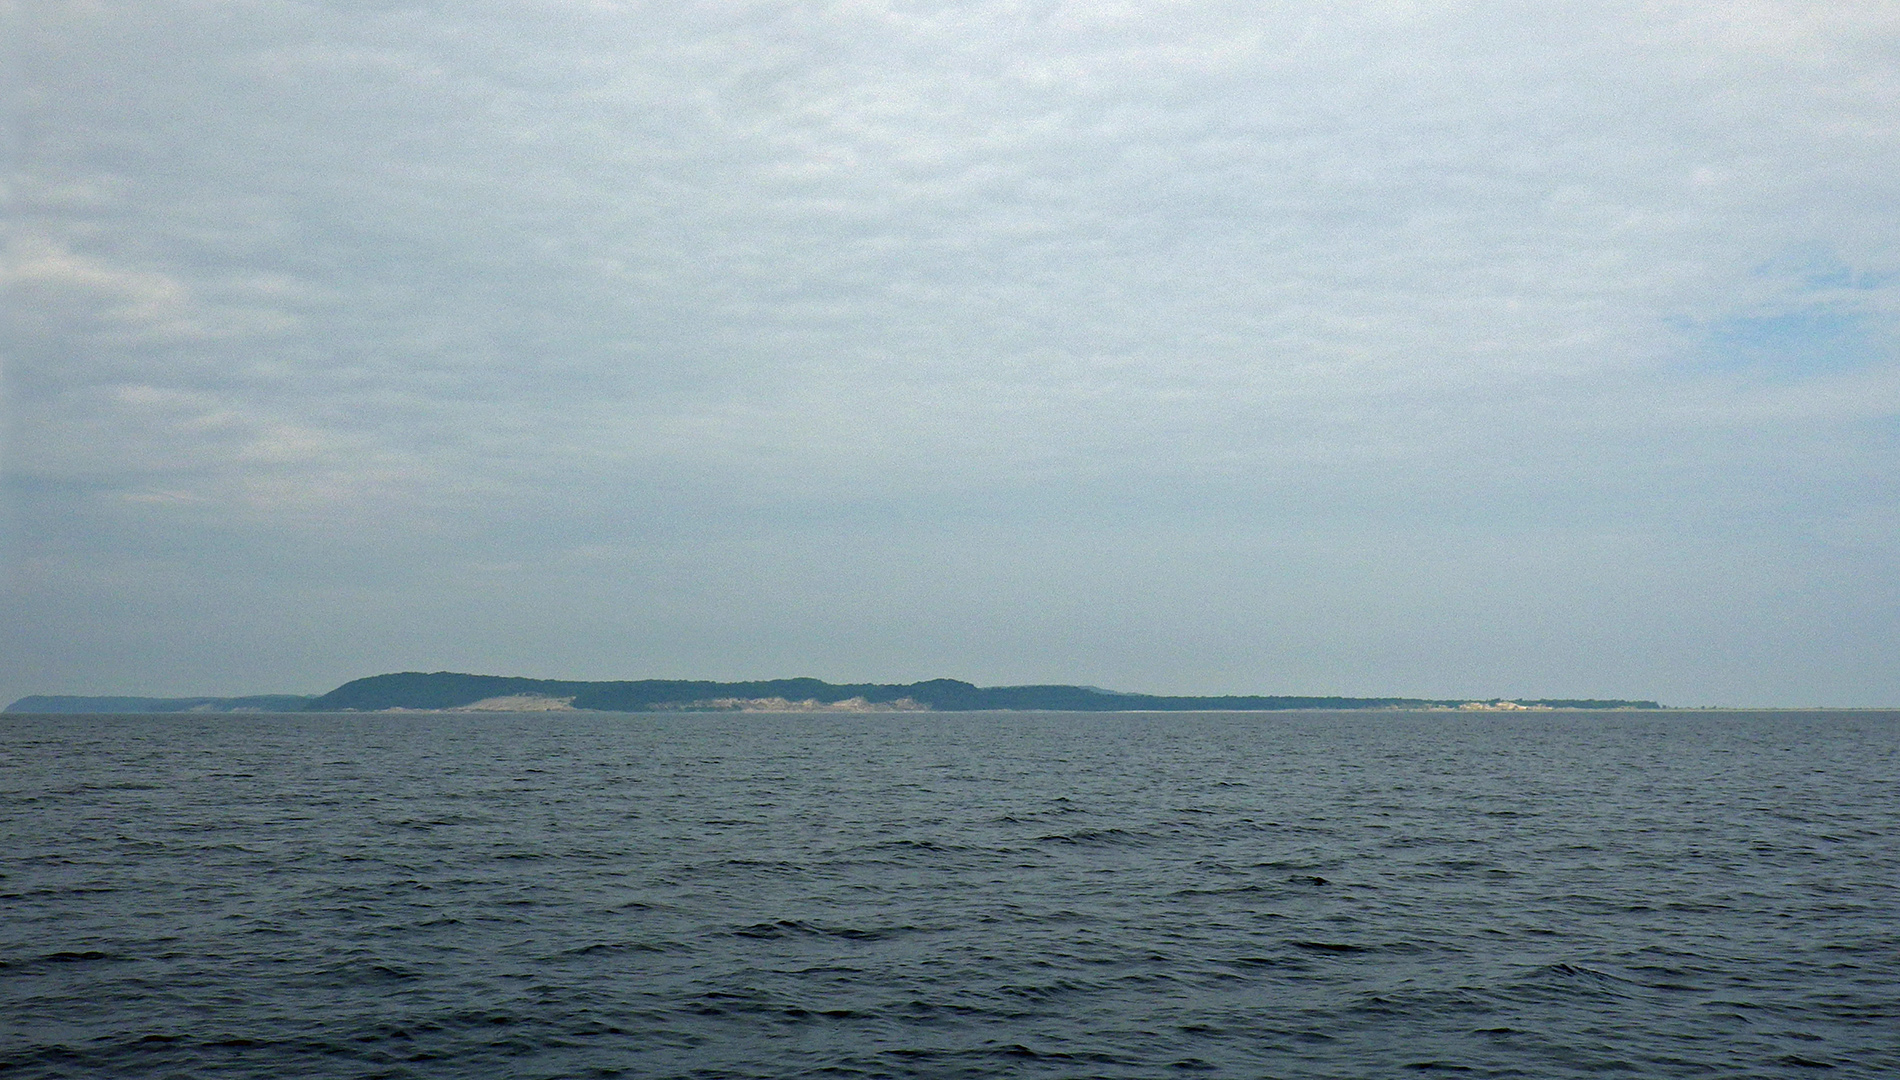 Looking at the south west side of North Manitou Island.